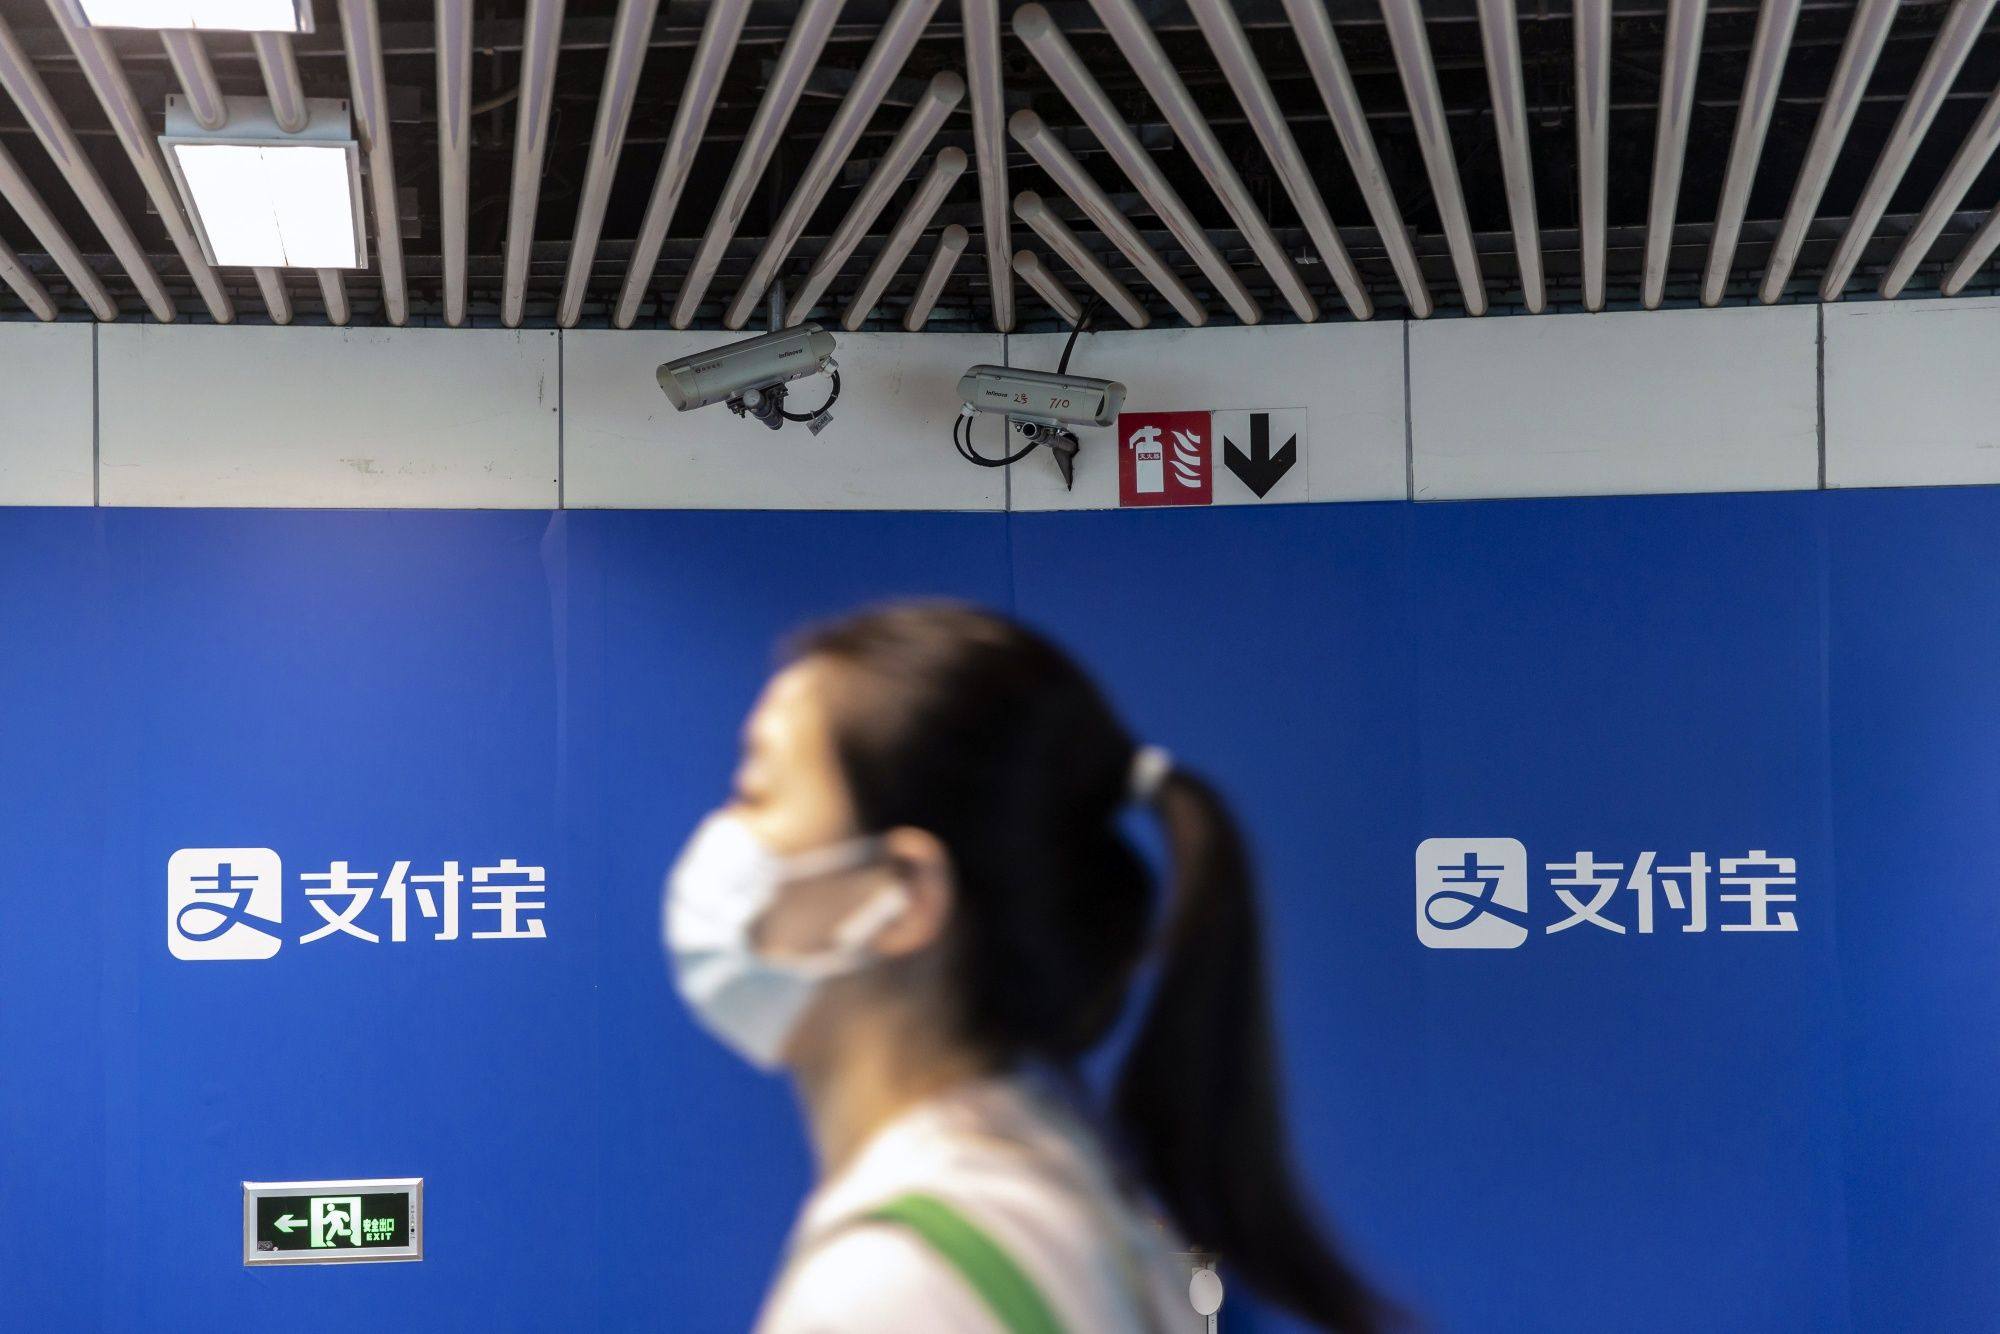 Advertisements for Ant Group’s payments app Alipay seen in Shanghai, July 28, 2022. Photo: Bloomberg